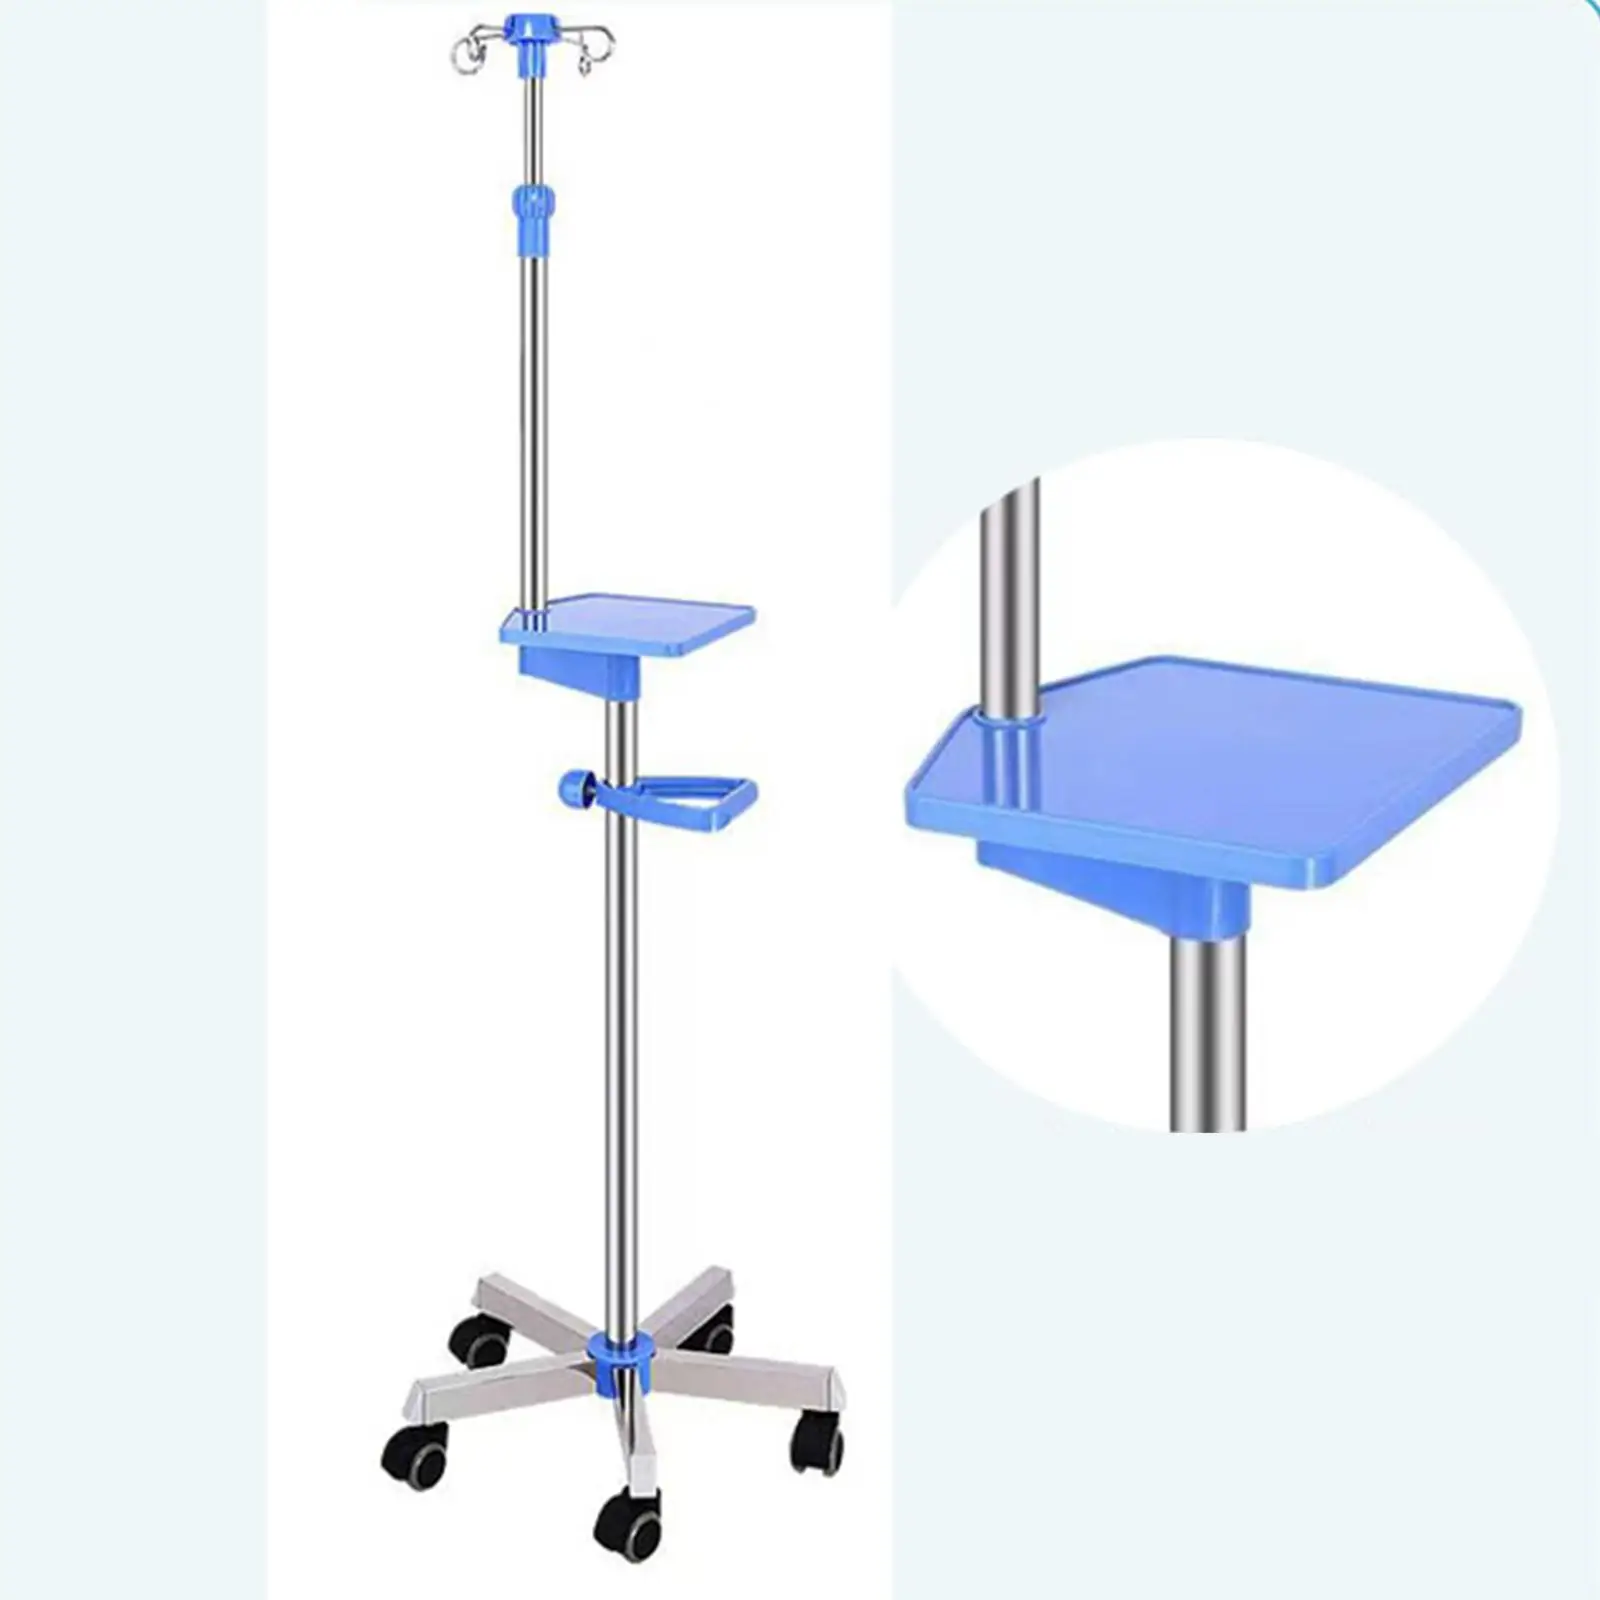 IV Pole Stand Adjustable IV Bag Holder Stainless Steel with Wheels IV Bag Stand IV Stand for Service Centers Nursing Homes Beds